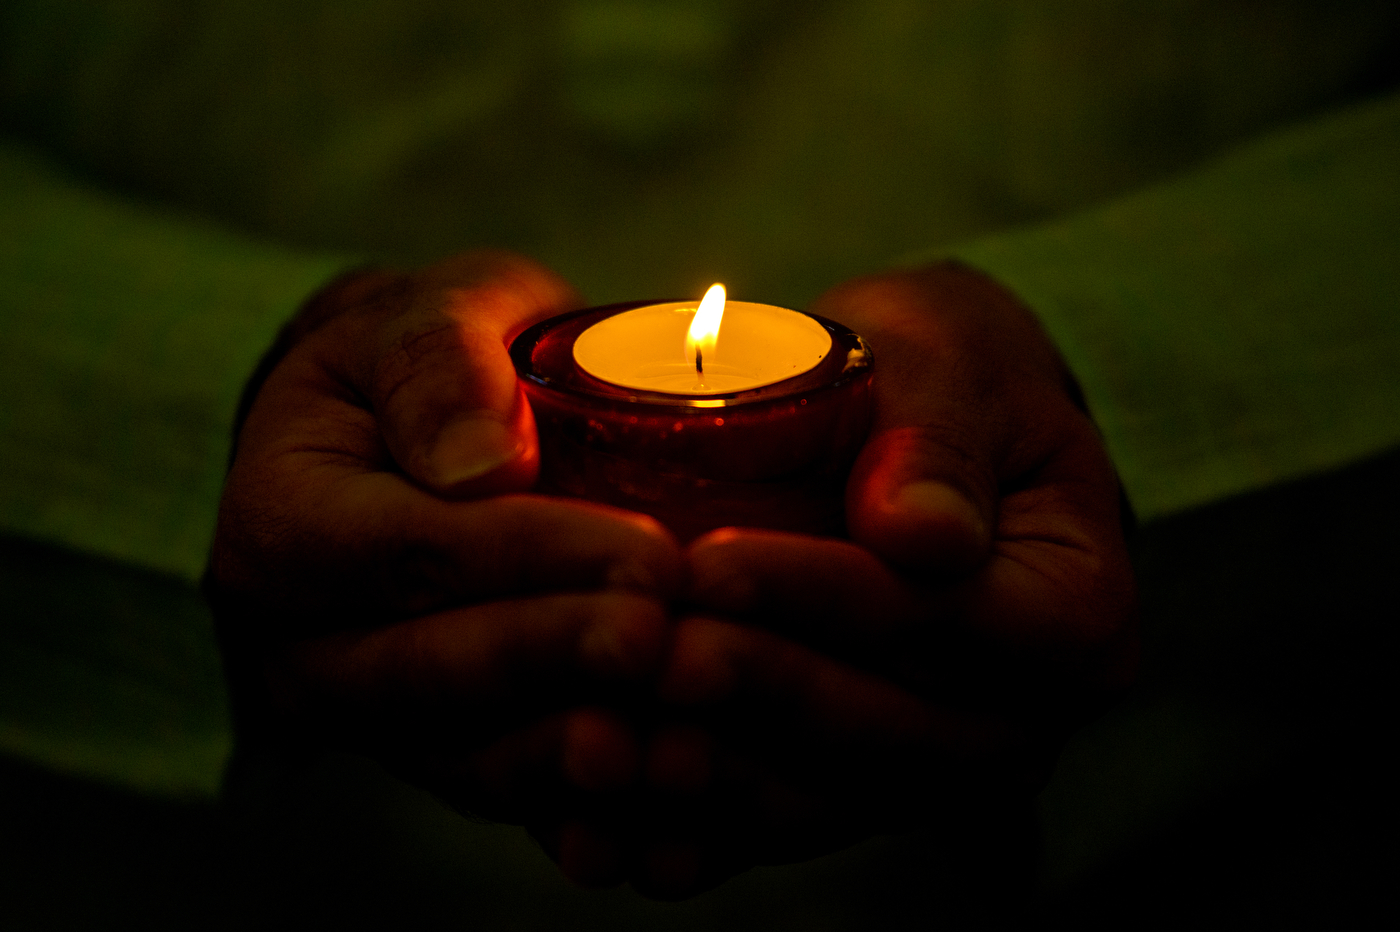 Hands holding a lit candle